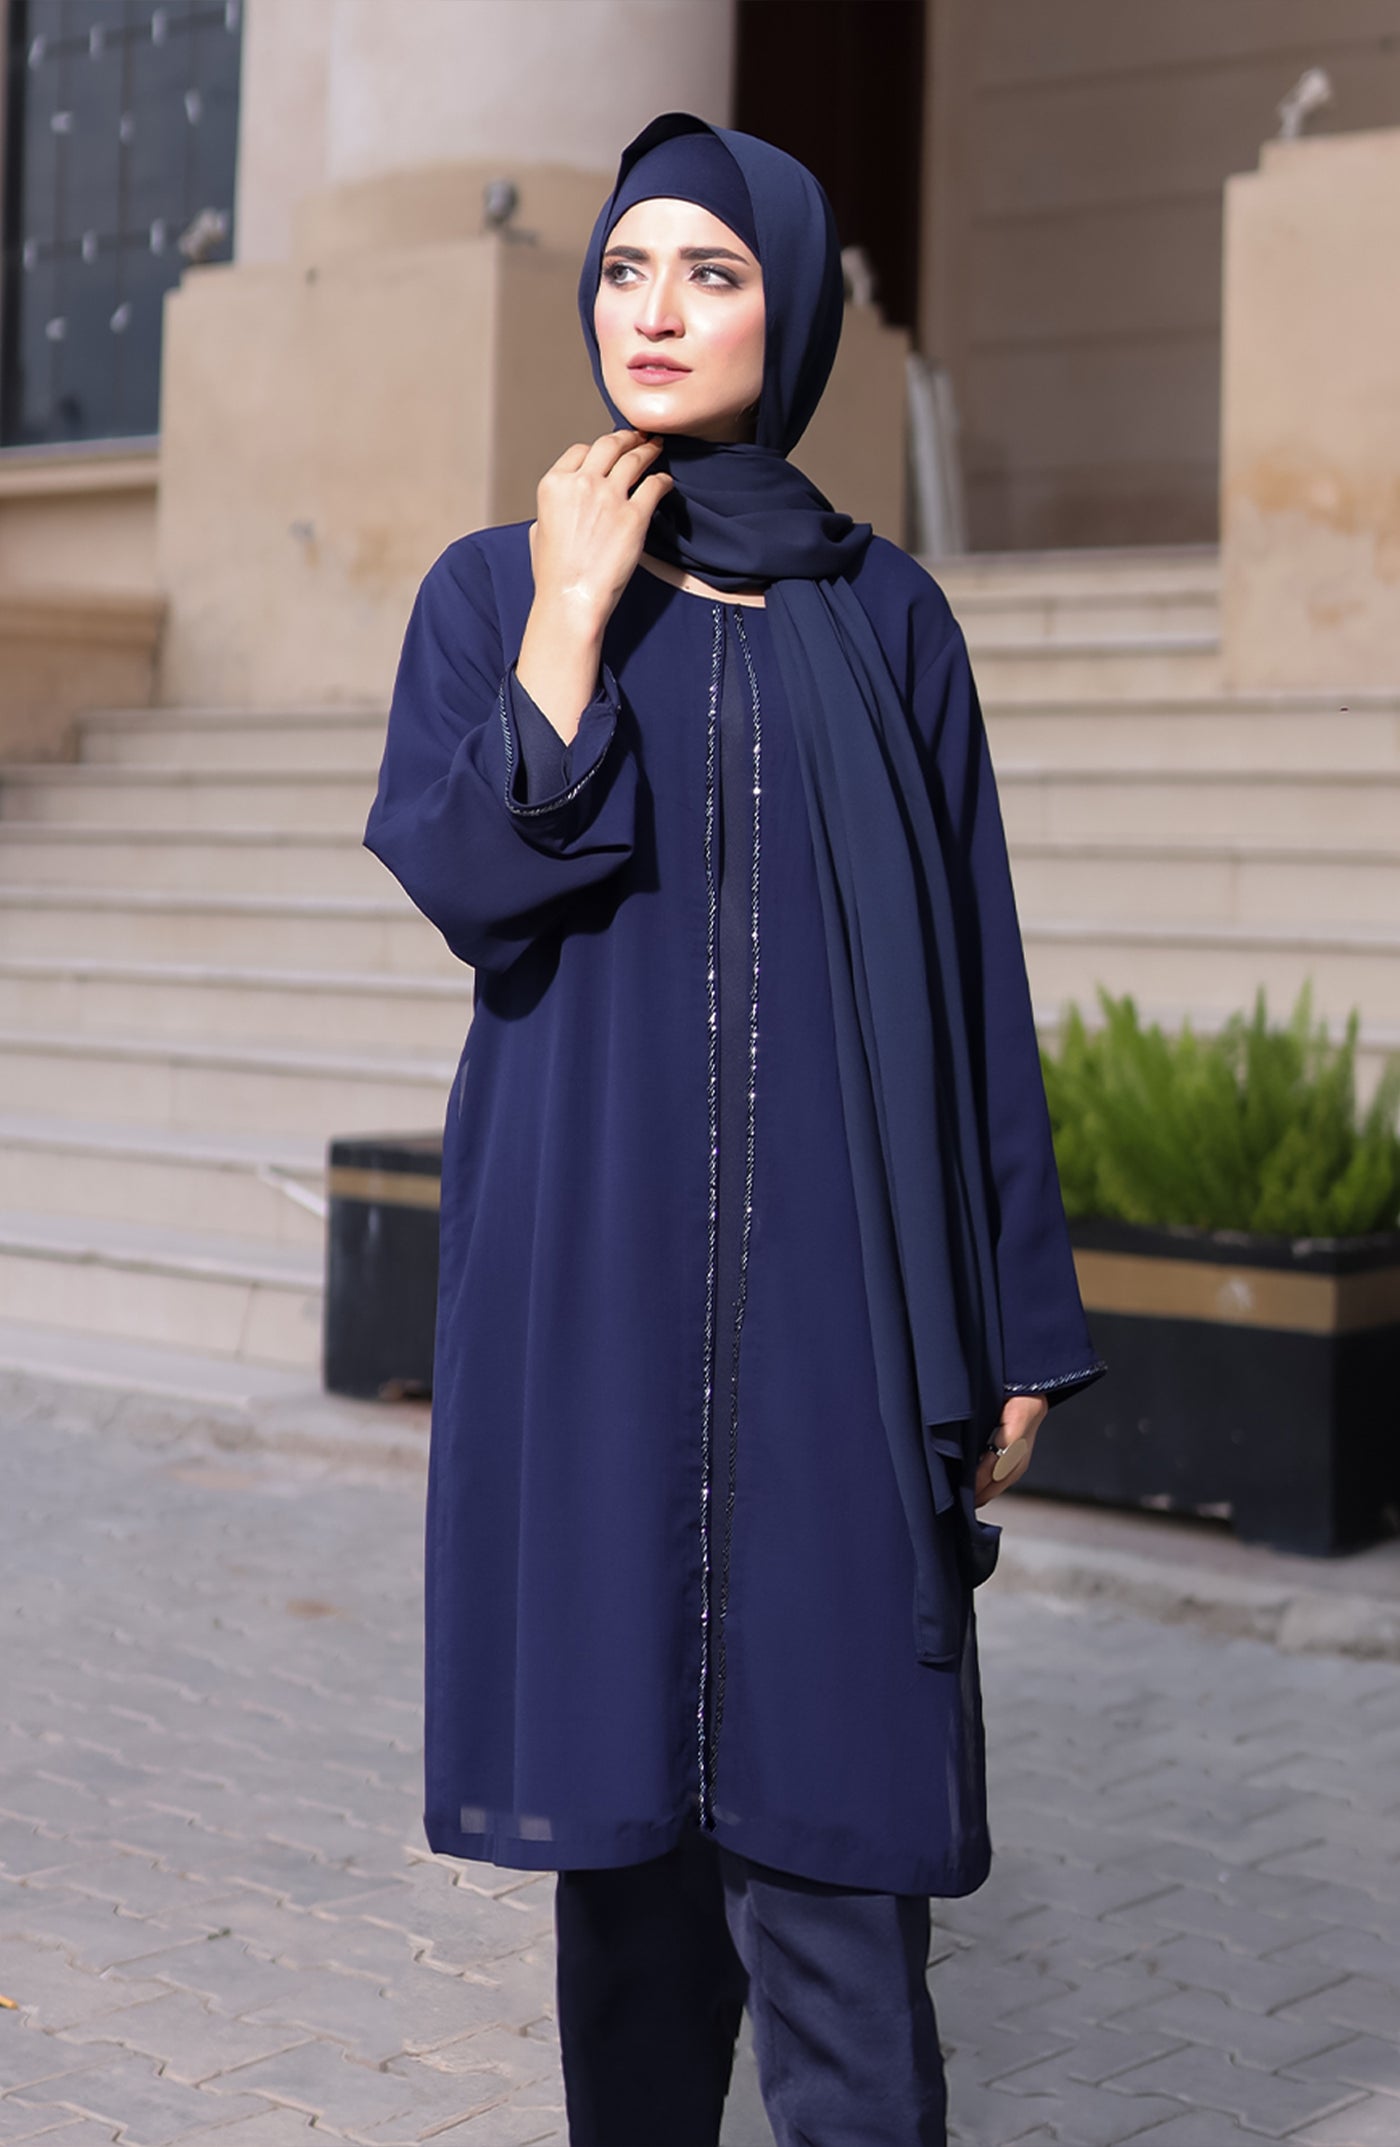 New and simple abaya designs for everyday wear